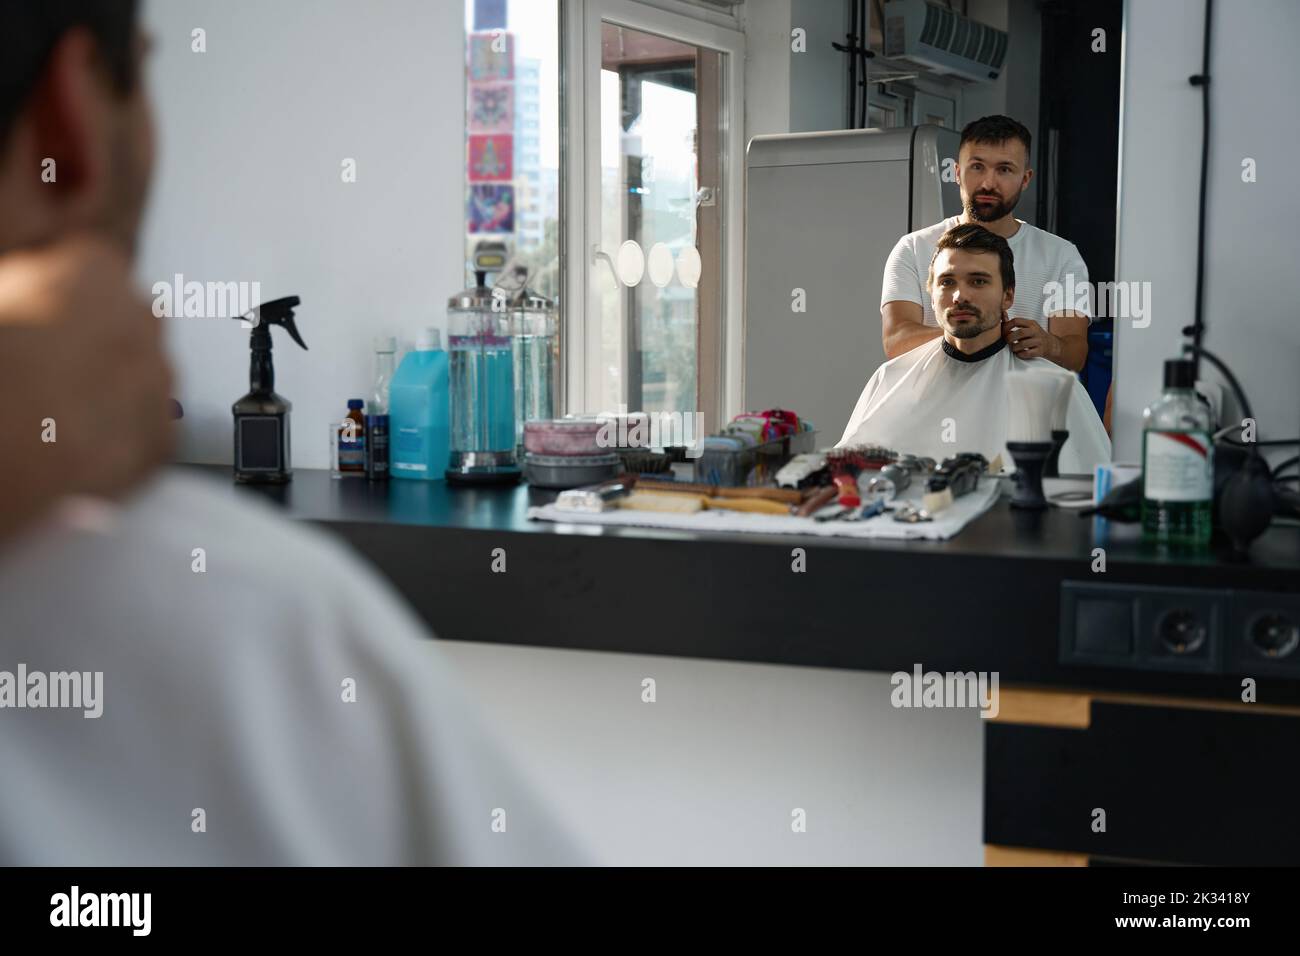 Hair salon attendant and client looking at their mirror reflection Stock Photo